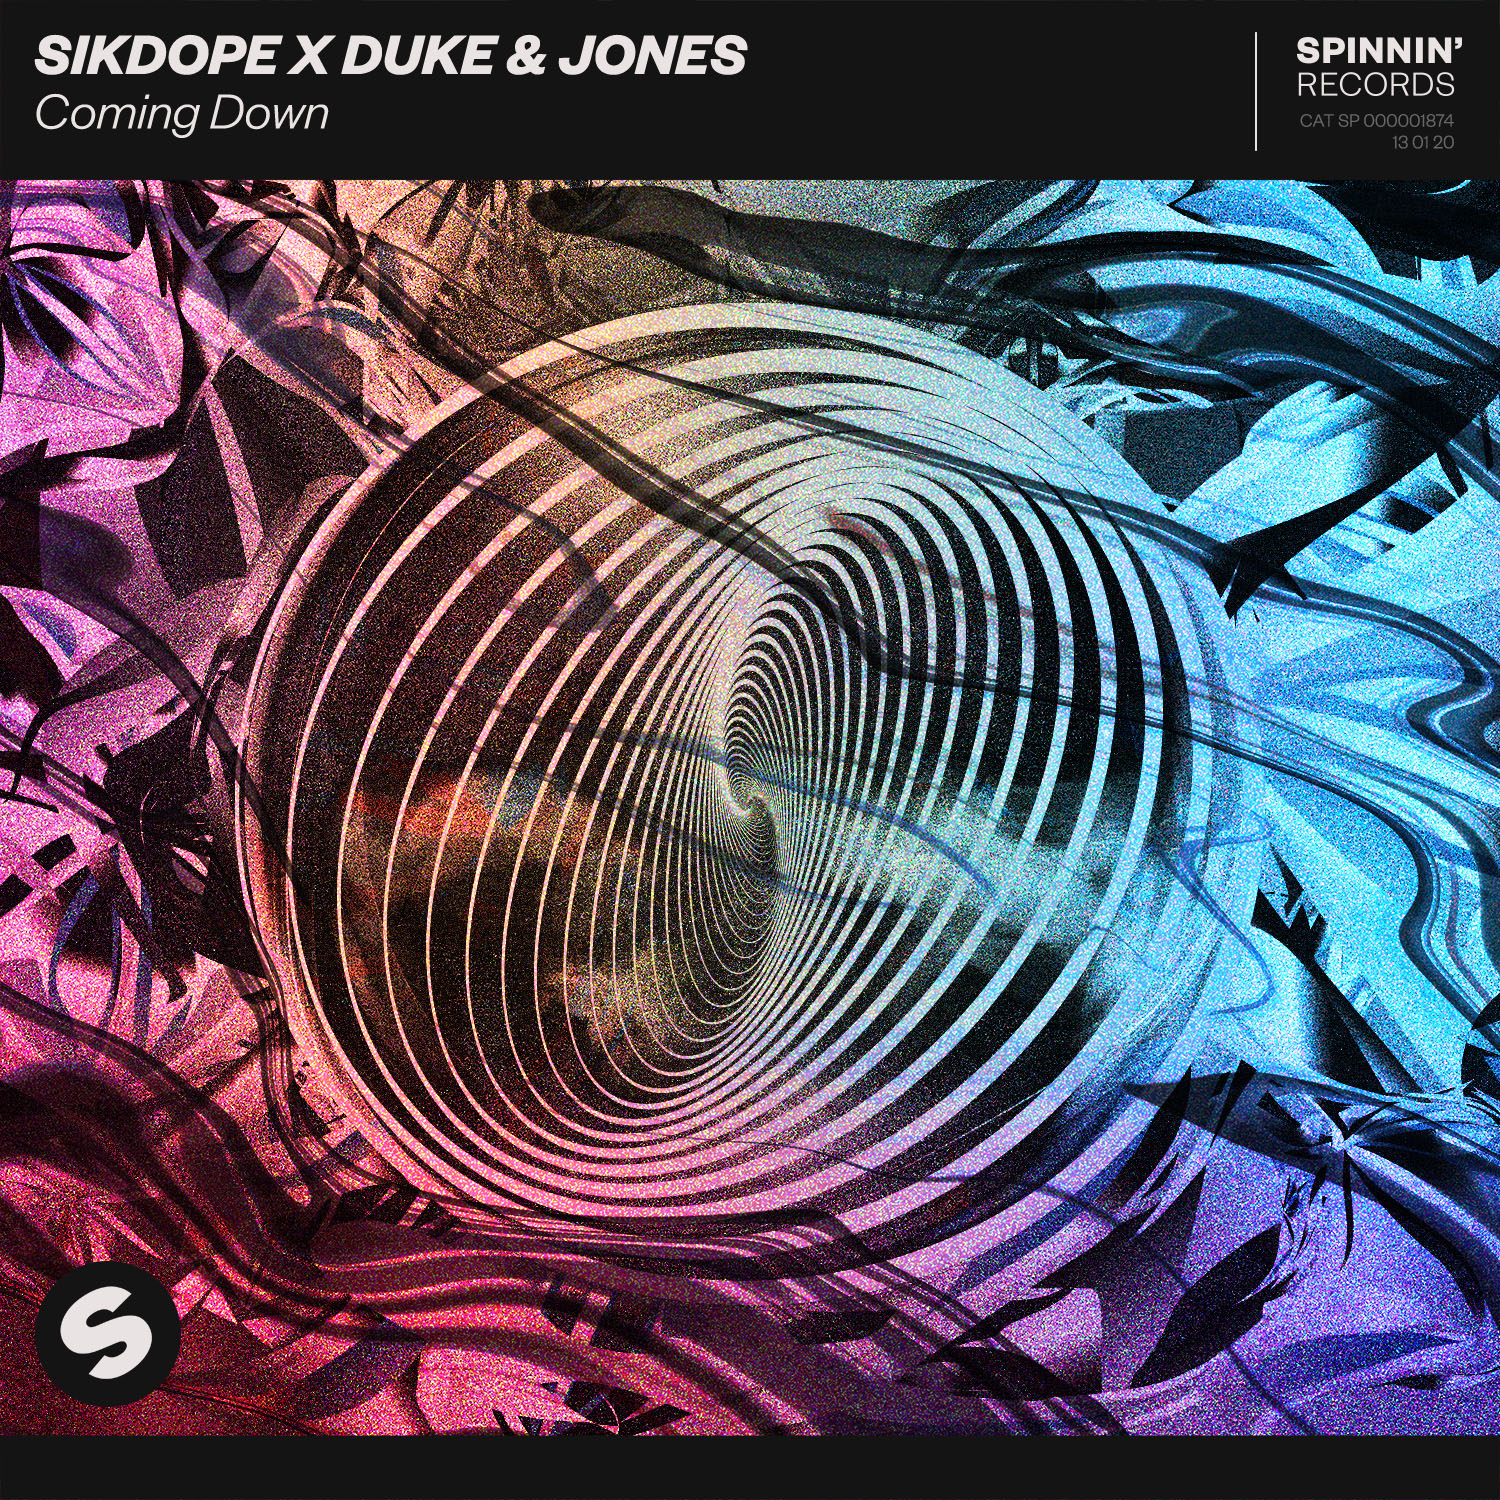 Sikdope and Duke & Jones Drop Epic Spinnin Records Single “Coming Down”